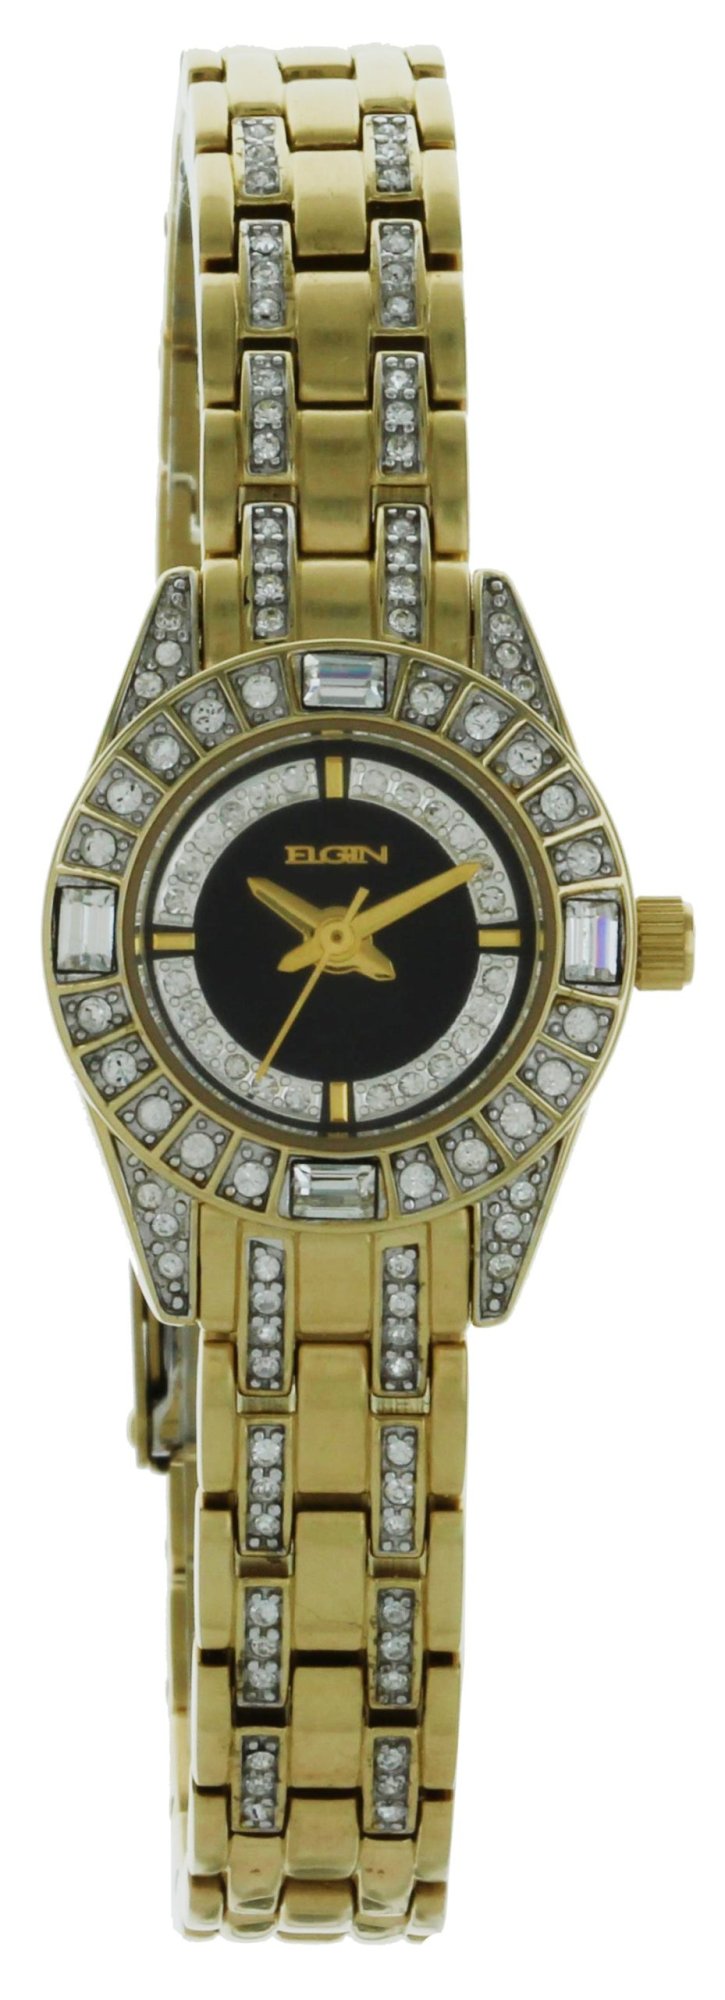 Model: Elgin EG231N Women's Gold Tone And stone accent Watch